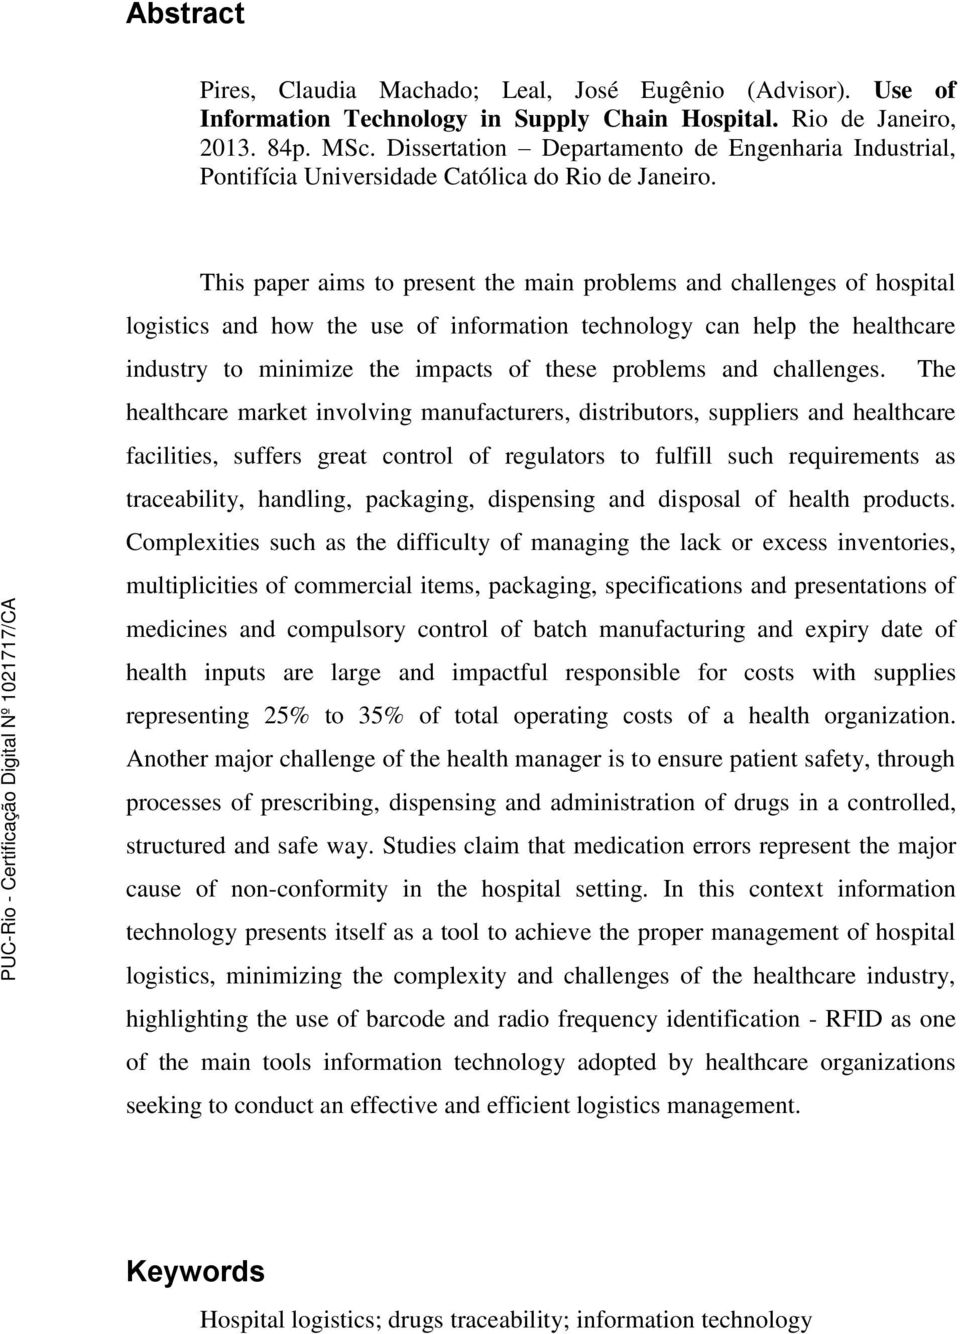 This paper aims to present the main problems and challenges of hospital logistics and how the use of information technology can help the healthcare industry to minimize the impacts of these problems